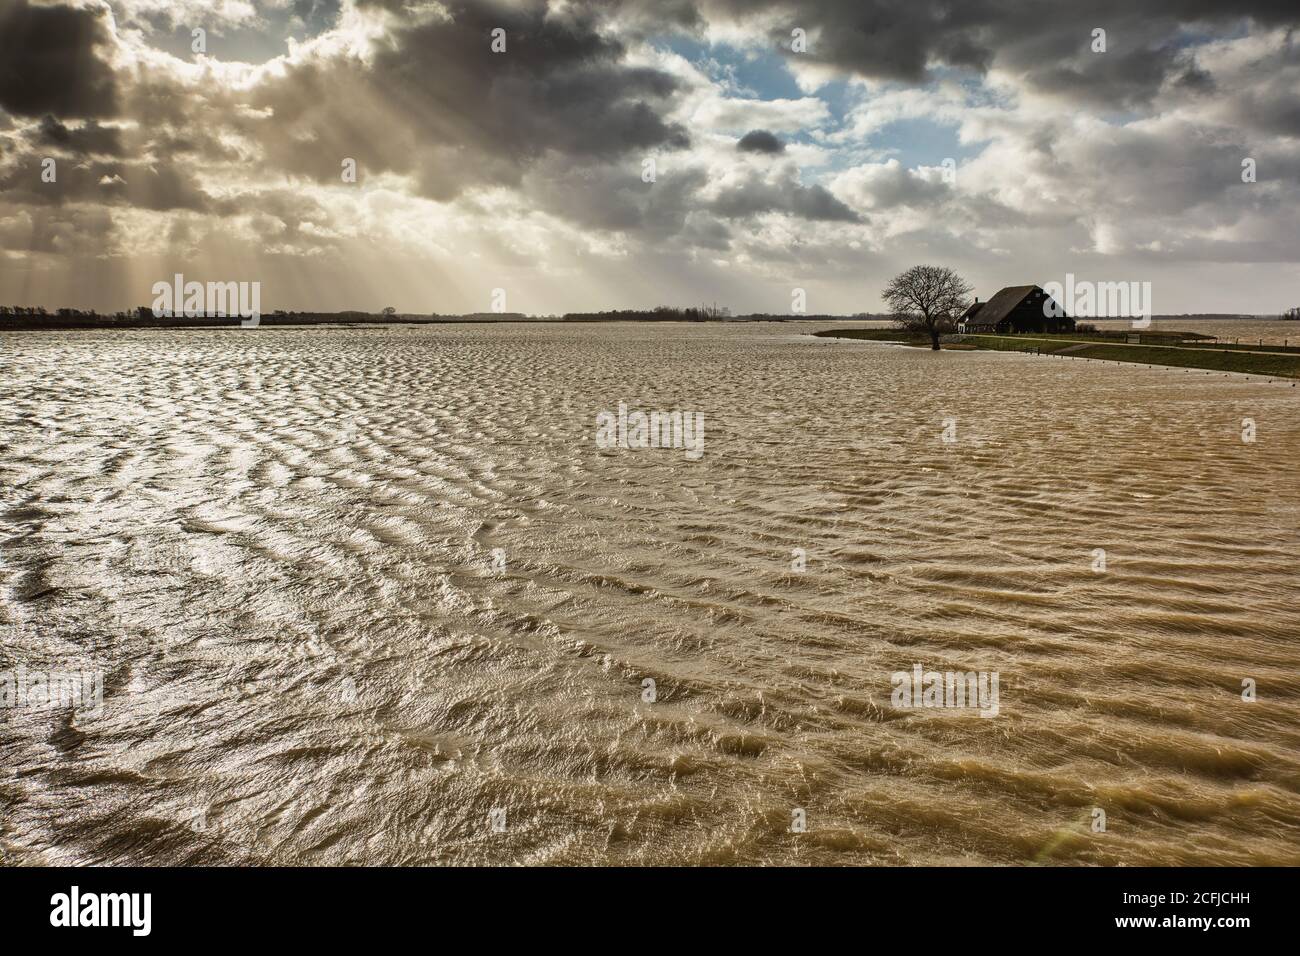 The Netherlands, Werkendam, National Park De Biesbosch. Intentional flooding of the Noordwaard polder. Room for the River project. Isolated farm. Stock Photo